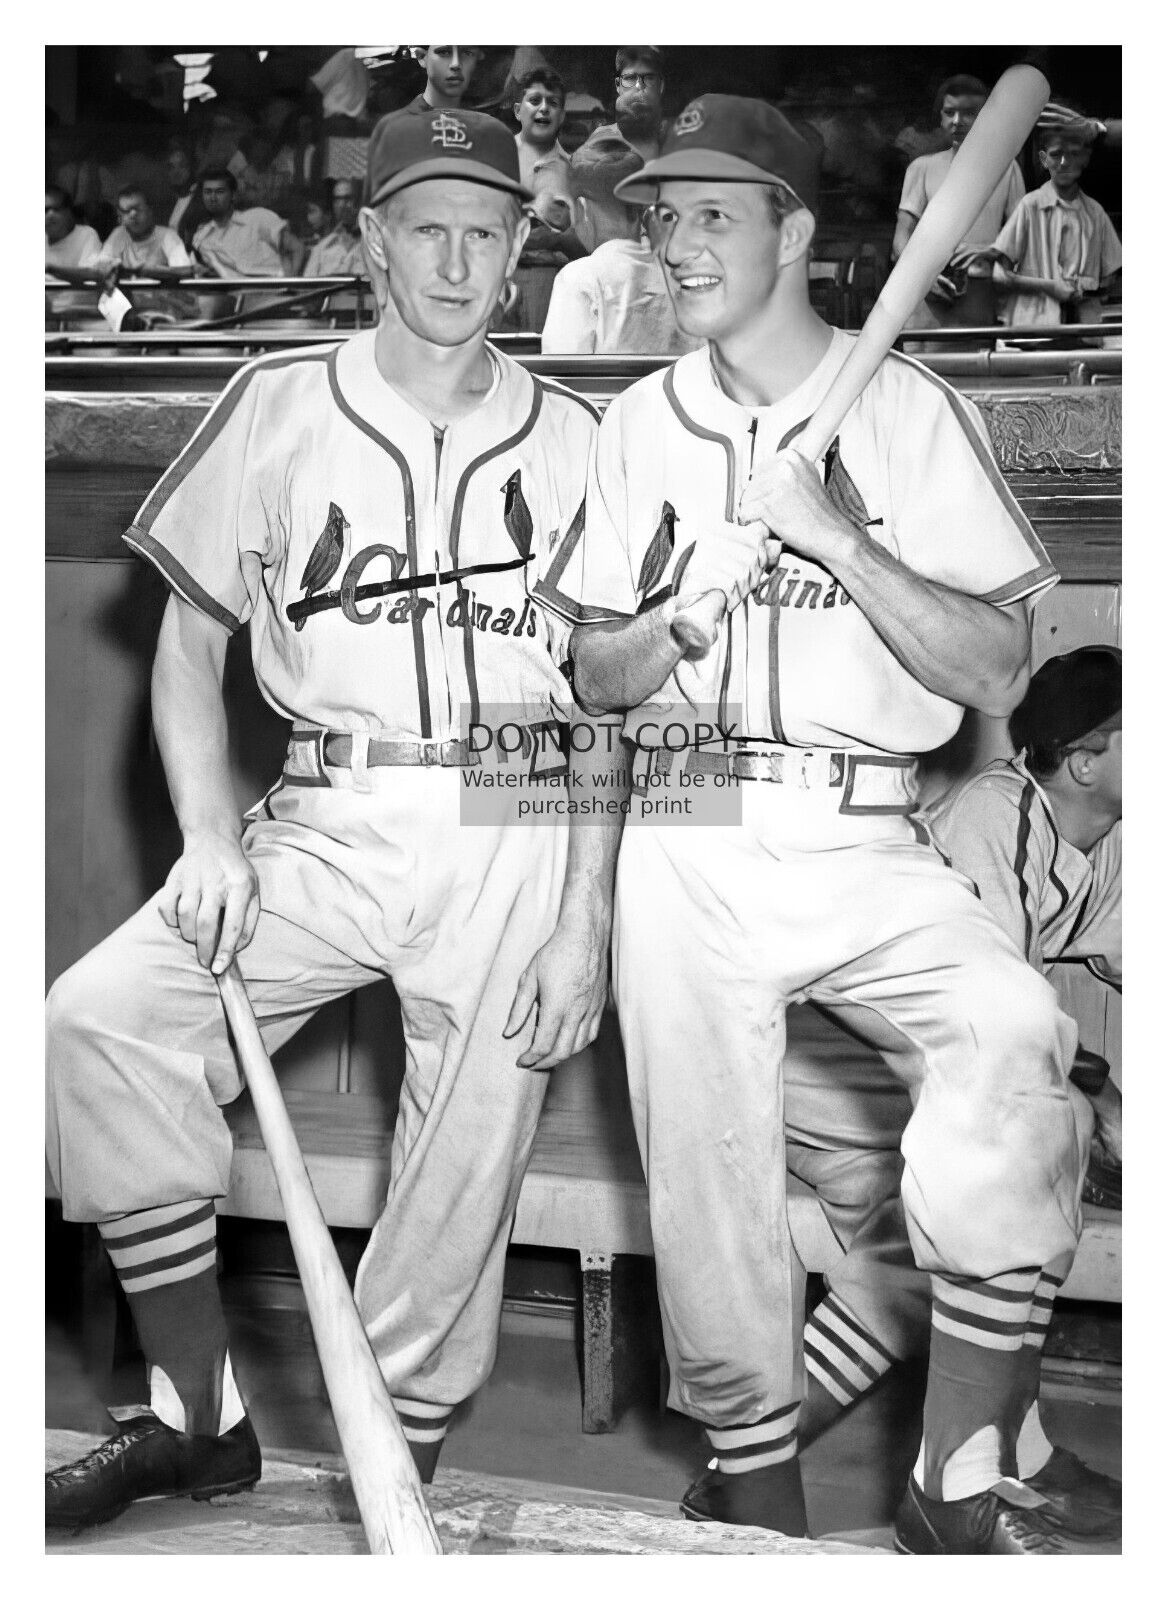 STAN MUSIAL AND RED SCHOENDIENST ST. LOUIS CARDINALS BASEBALL PLAYERS 5X7 PHOTO